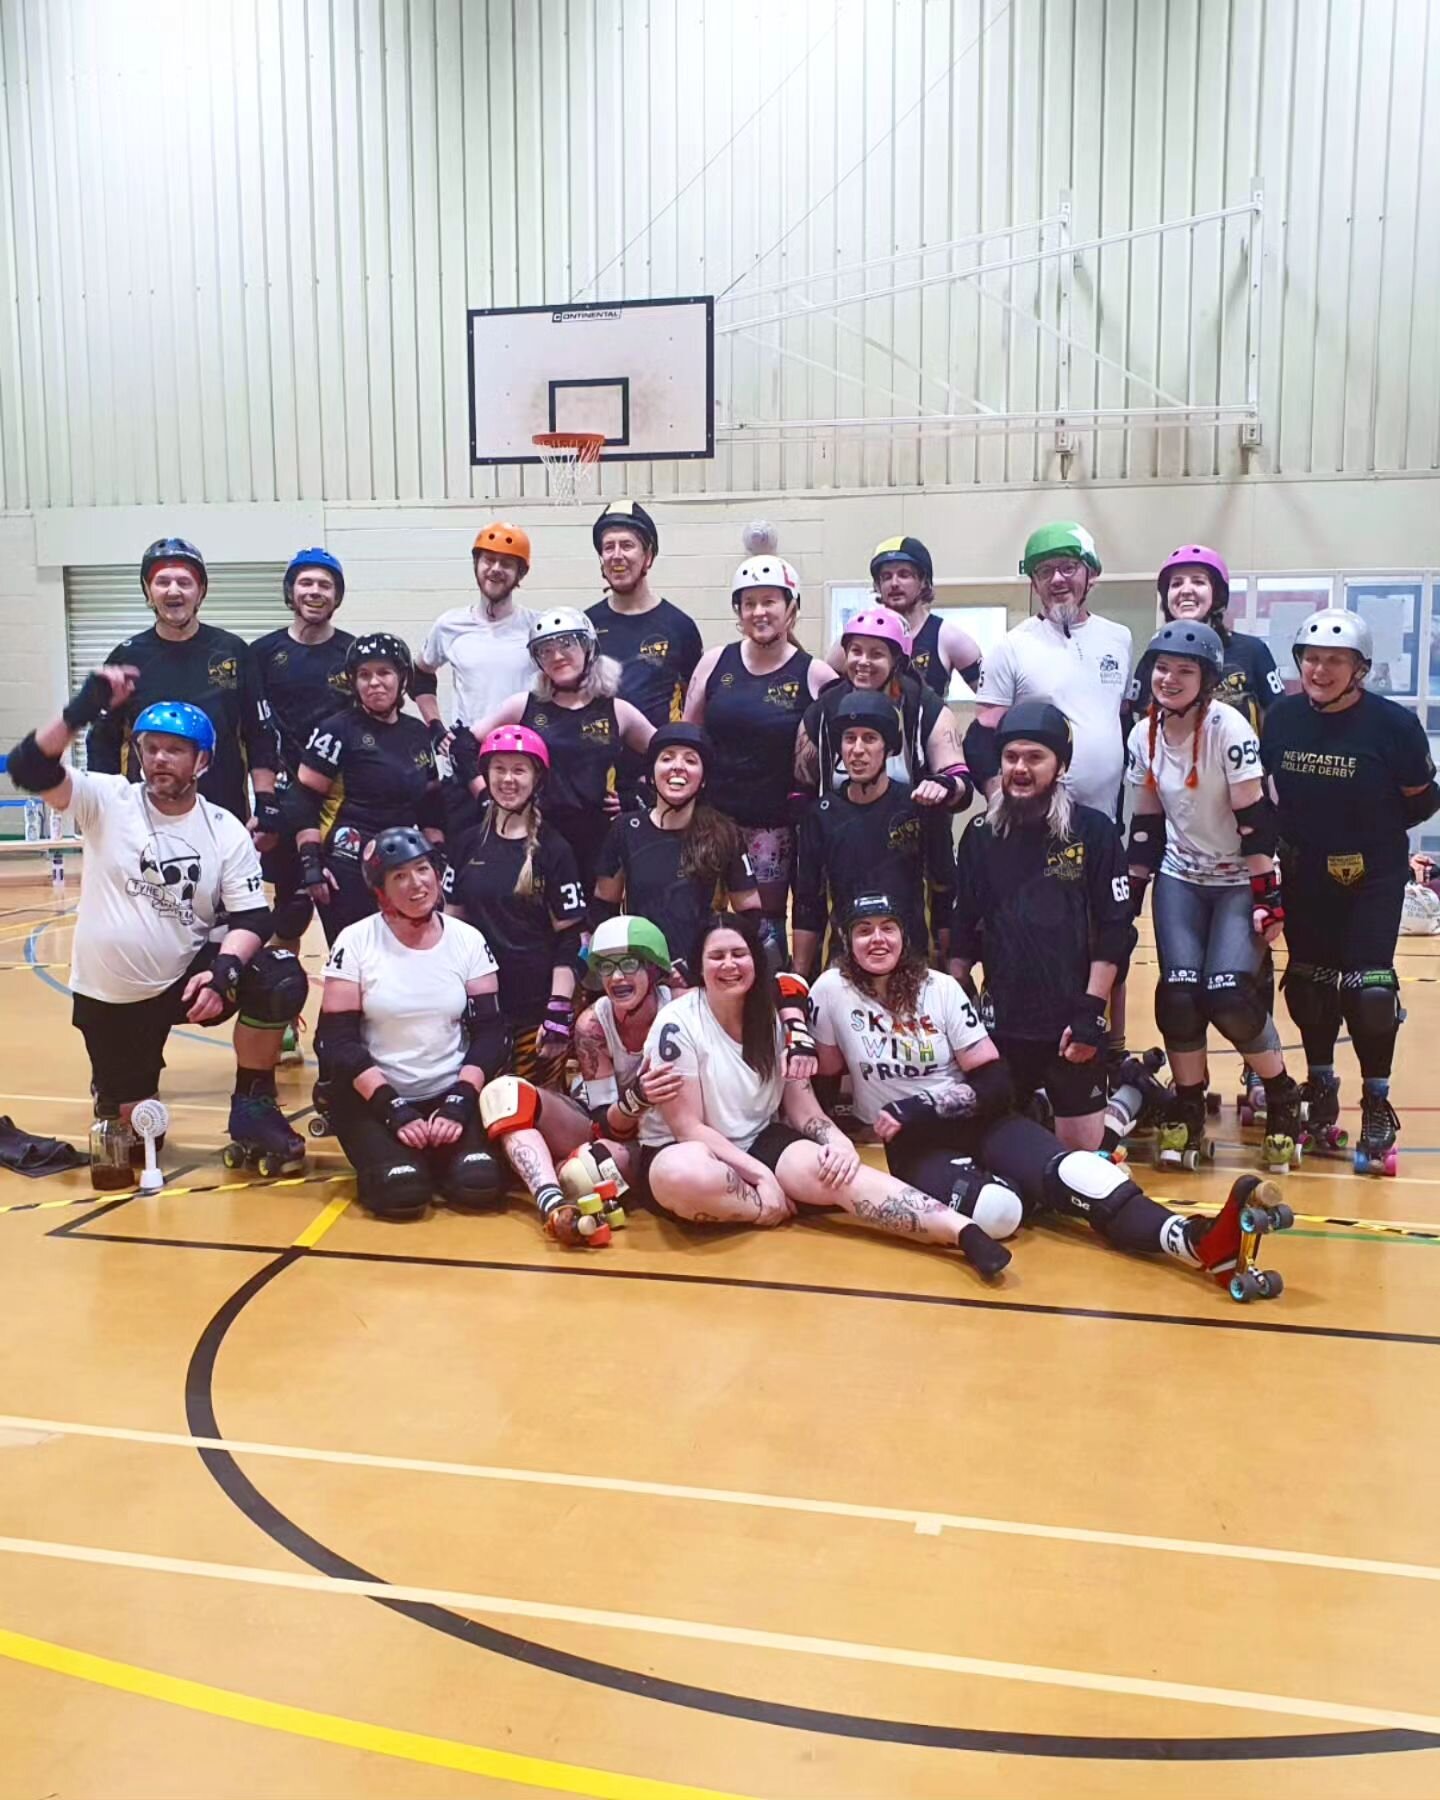 BCRD X @tyneandfear_rd 

A big well done to the BCRD-ers who skated against Tyne and Fear this weekend, a formidable opponent and challenging game.

Numbers were not on our side but we gave it our all, and Maddie captained us all excellently whilst o